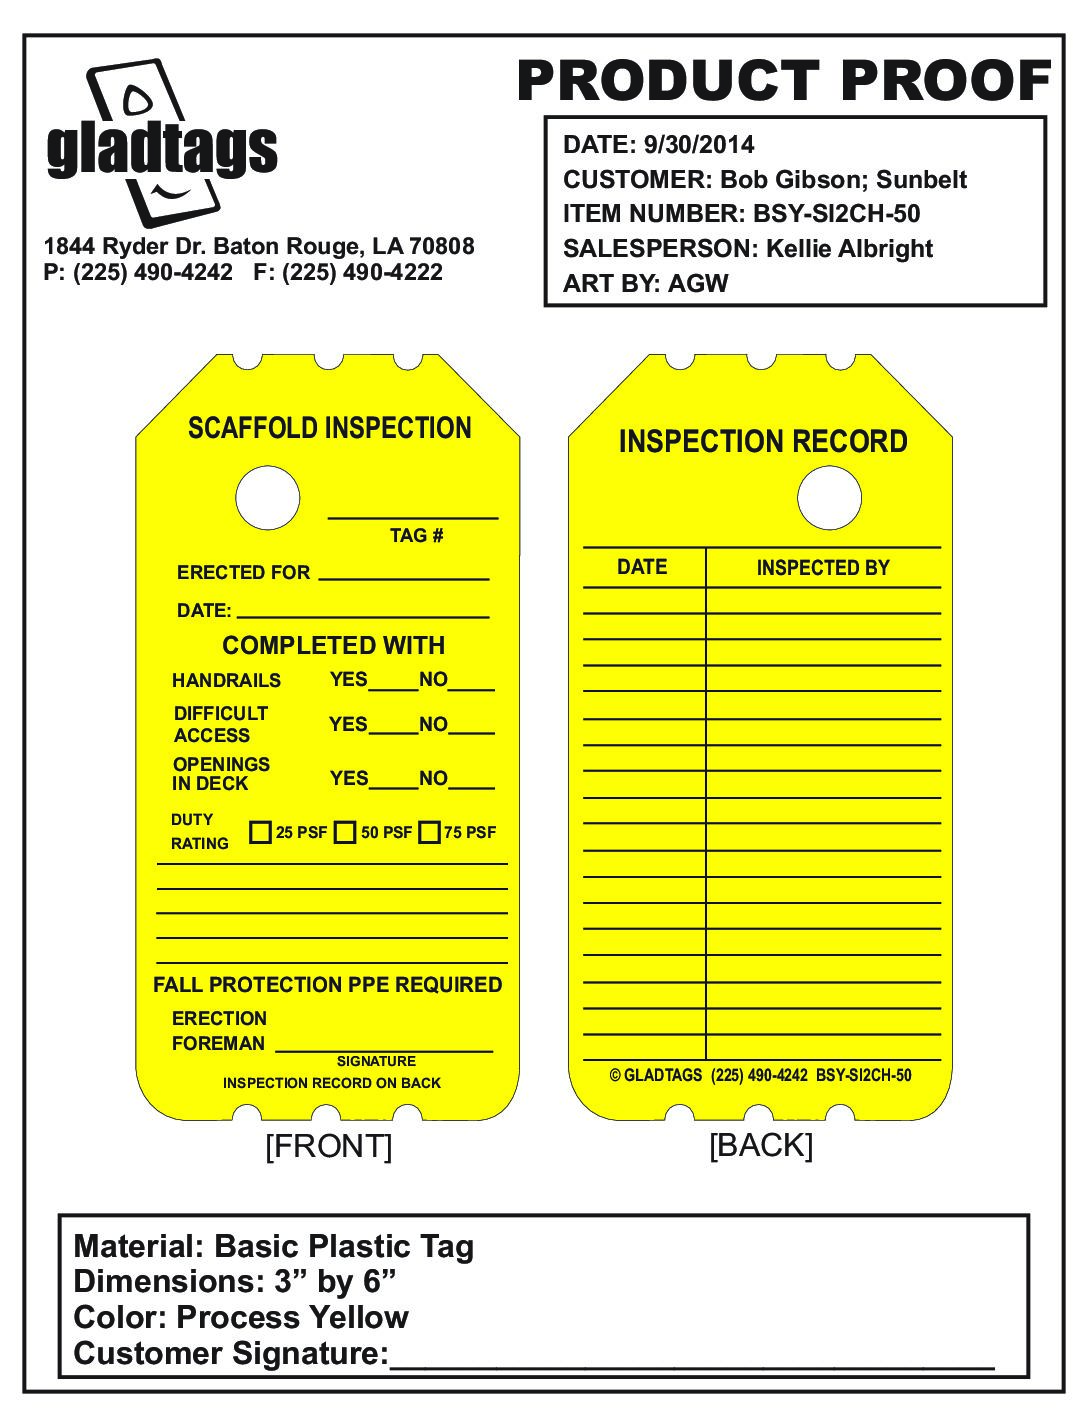 3.25X6 Yellow Laminated Insert with Scaffold Inspection on Front with Inspection Record on Back – BSY-SI2CH-50